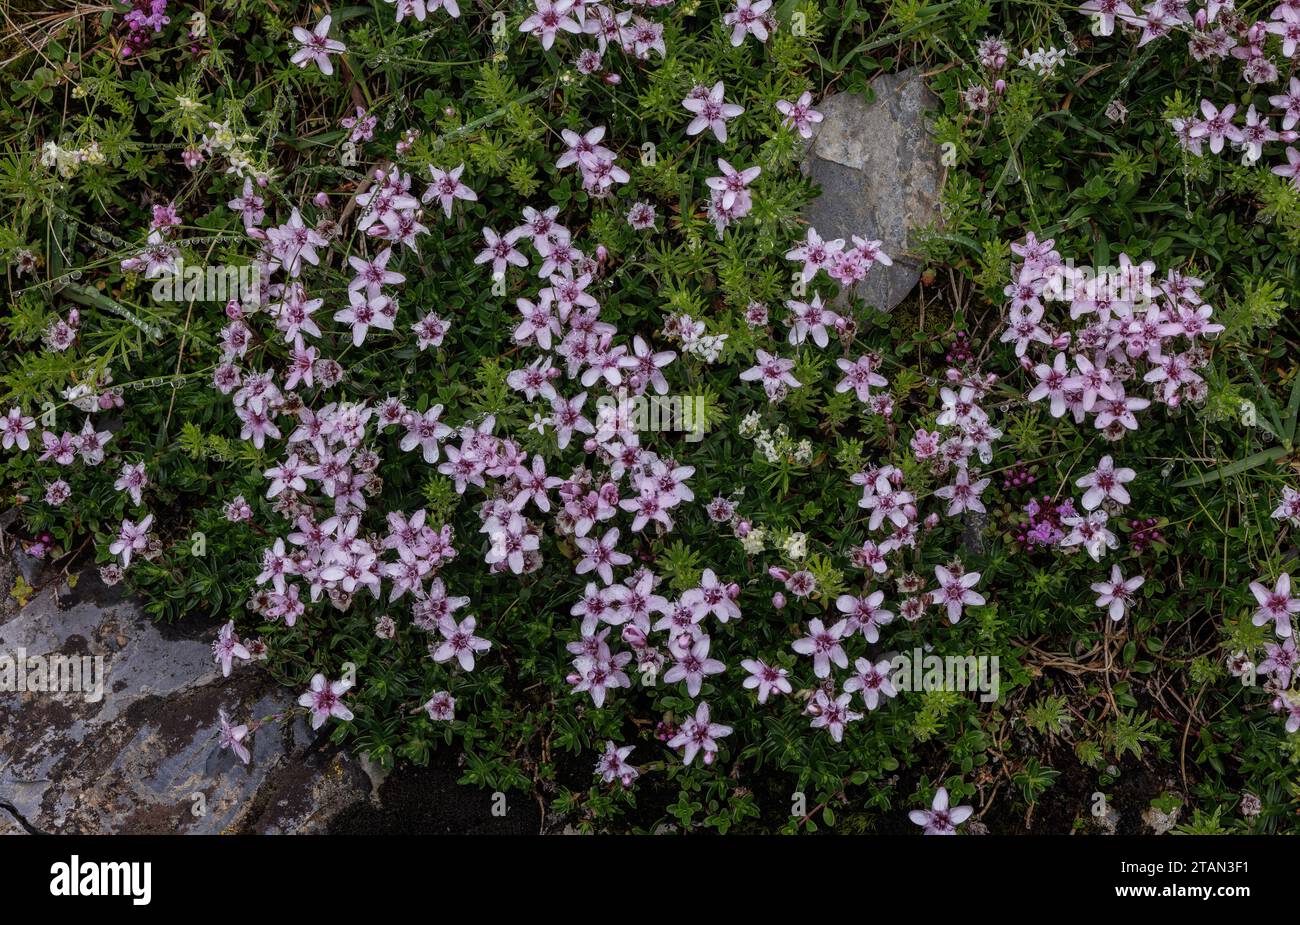 Pink Sandwort, Arenaria purpurascens in flower on rocks in the French Pyrenees. Stock Photo